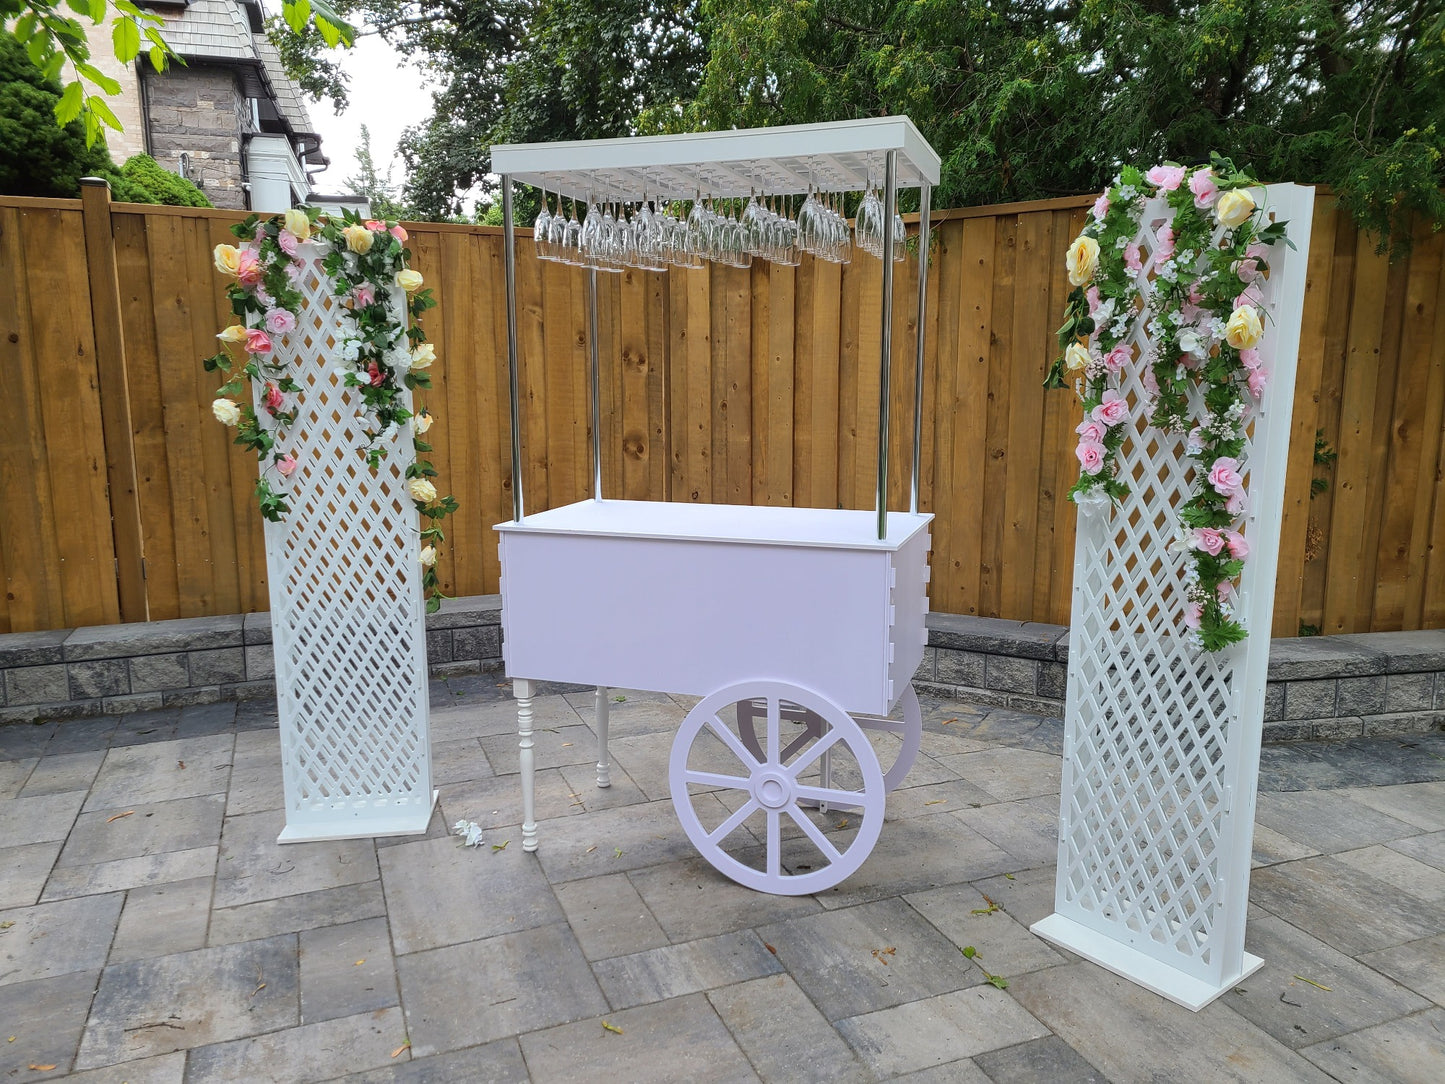 candy carts for sale, Mobile bar cart, drink cart, party decor, wedding decorations, champagne display, event bar, collapsible bar cart, white PVC bar cart, Toronto-made party supplies